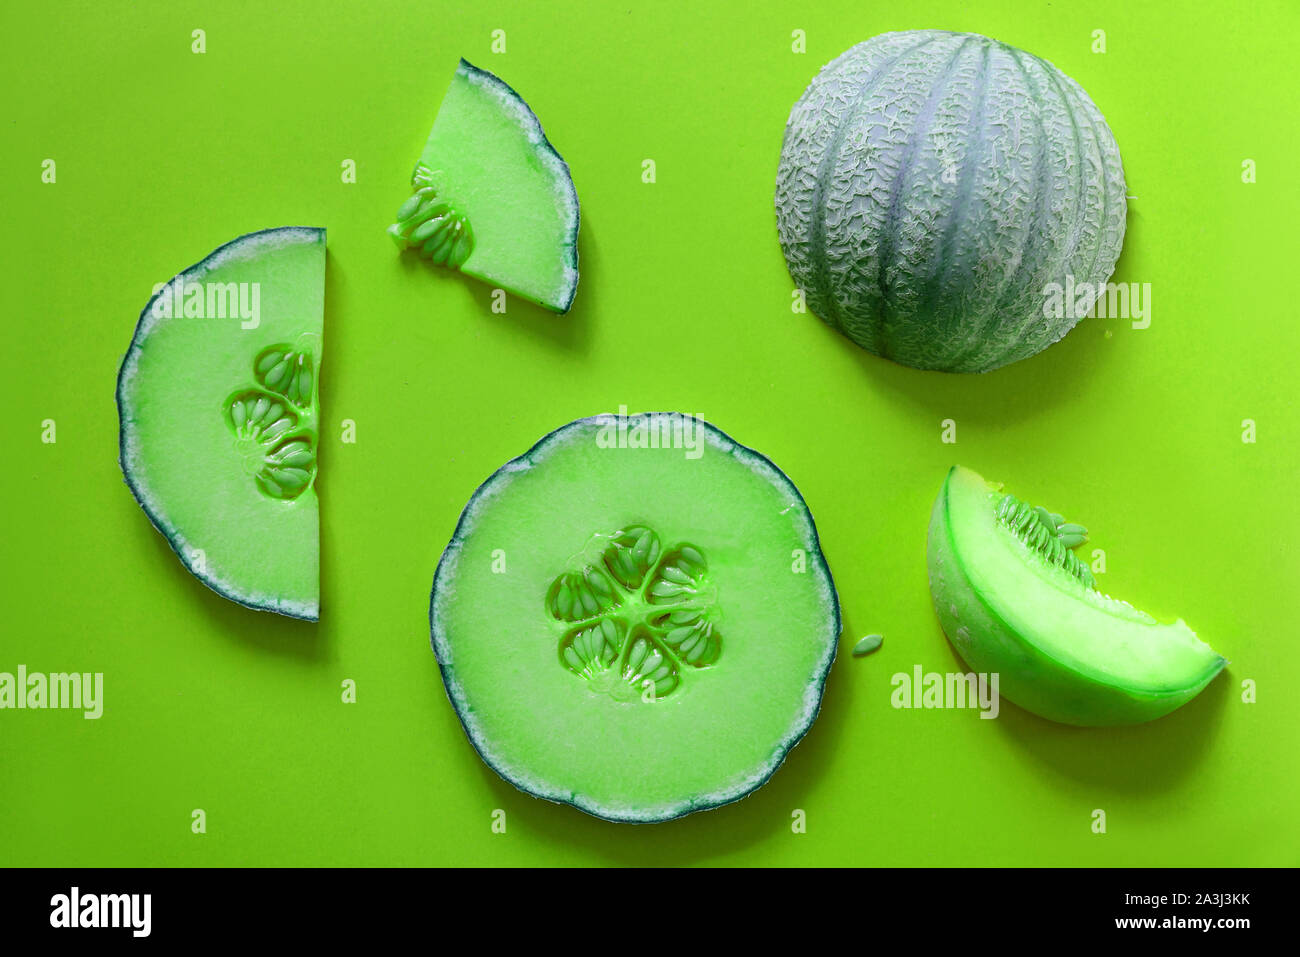 Slices cantaloupe sliced isolated on green neon background.Flat lay.concept food ideas Stock Photo